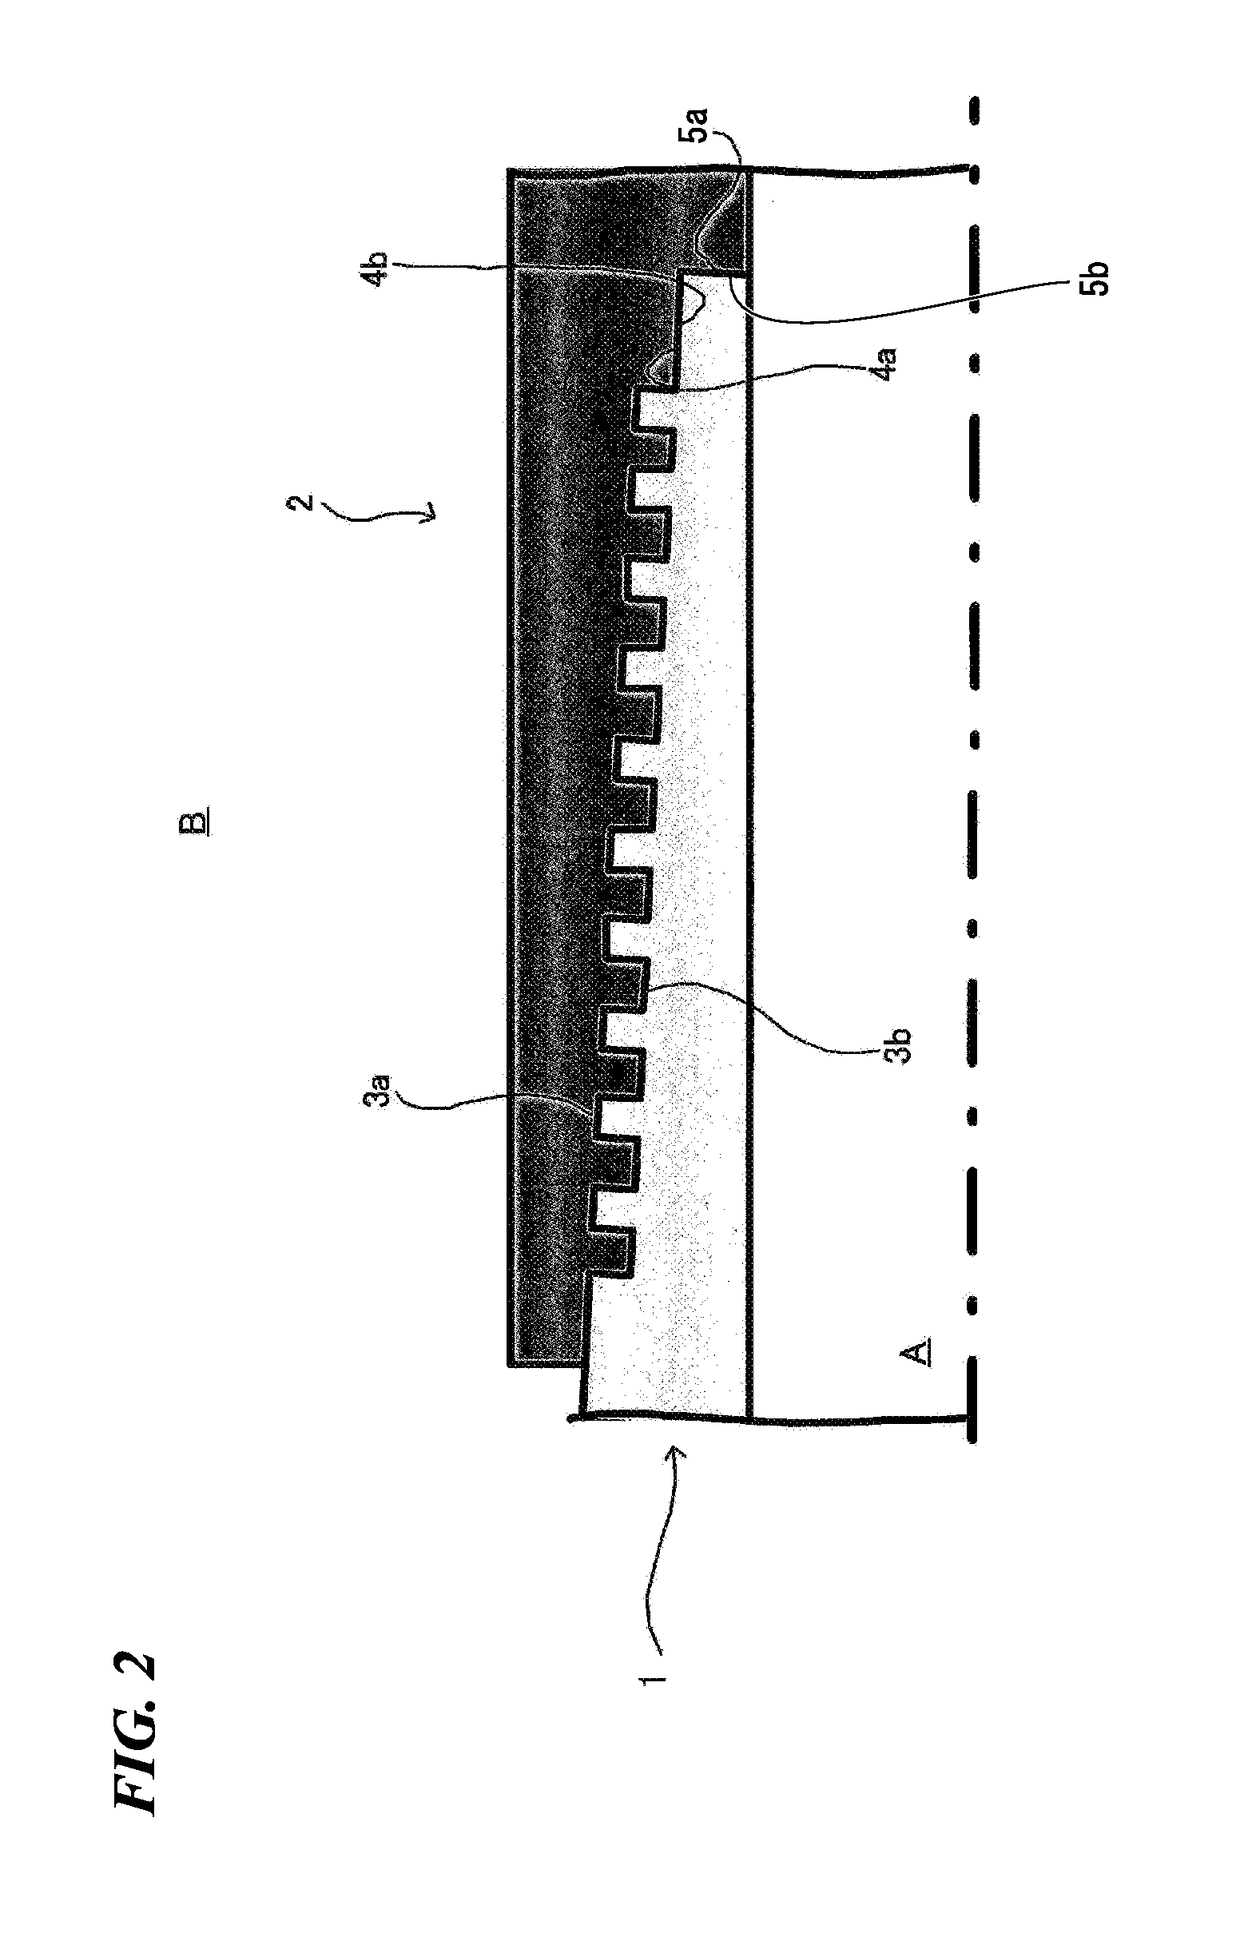 Composition for solid coating formation and tubular threaded joint